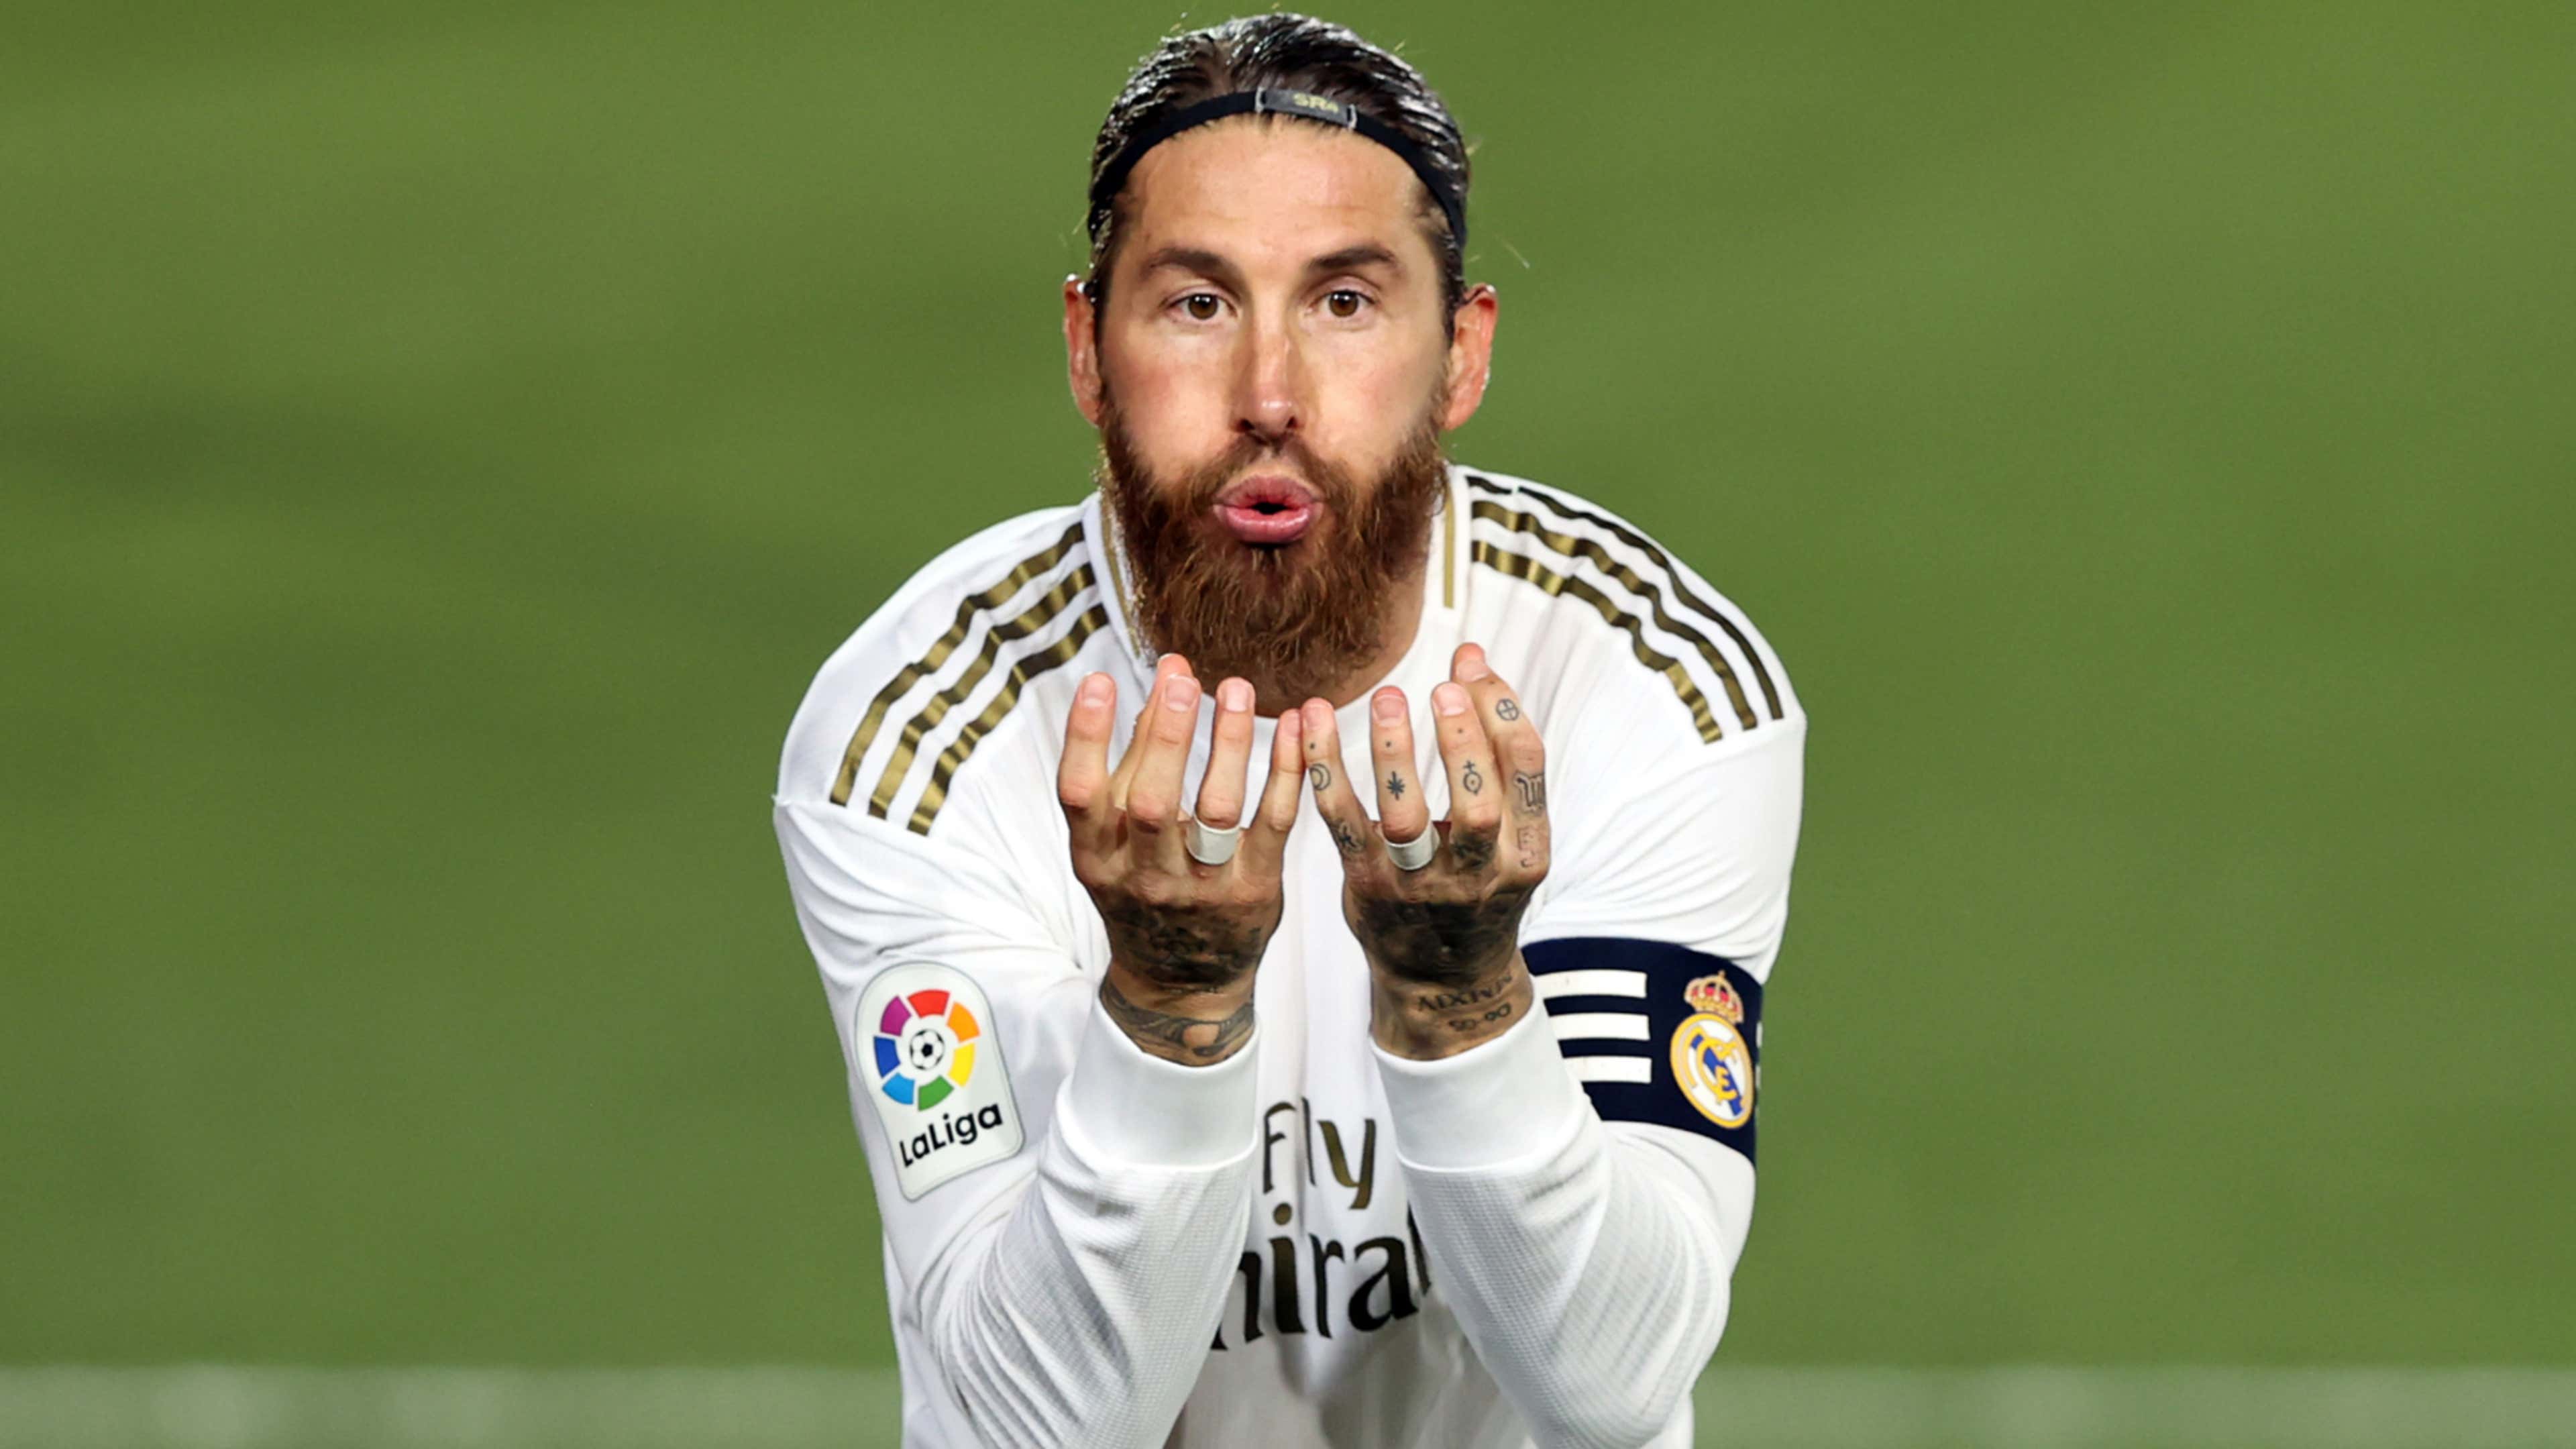 Sergio Ramos to Leave Real Madrid; Legendary Captain Spent 16